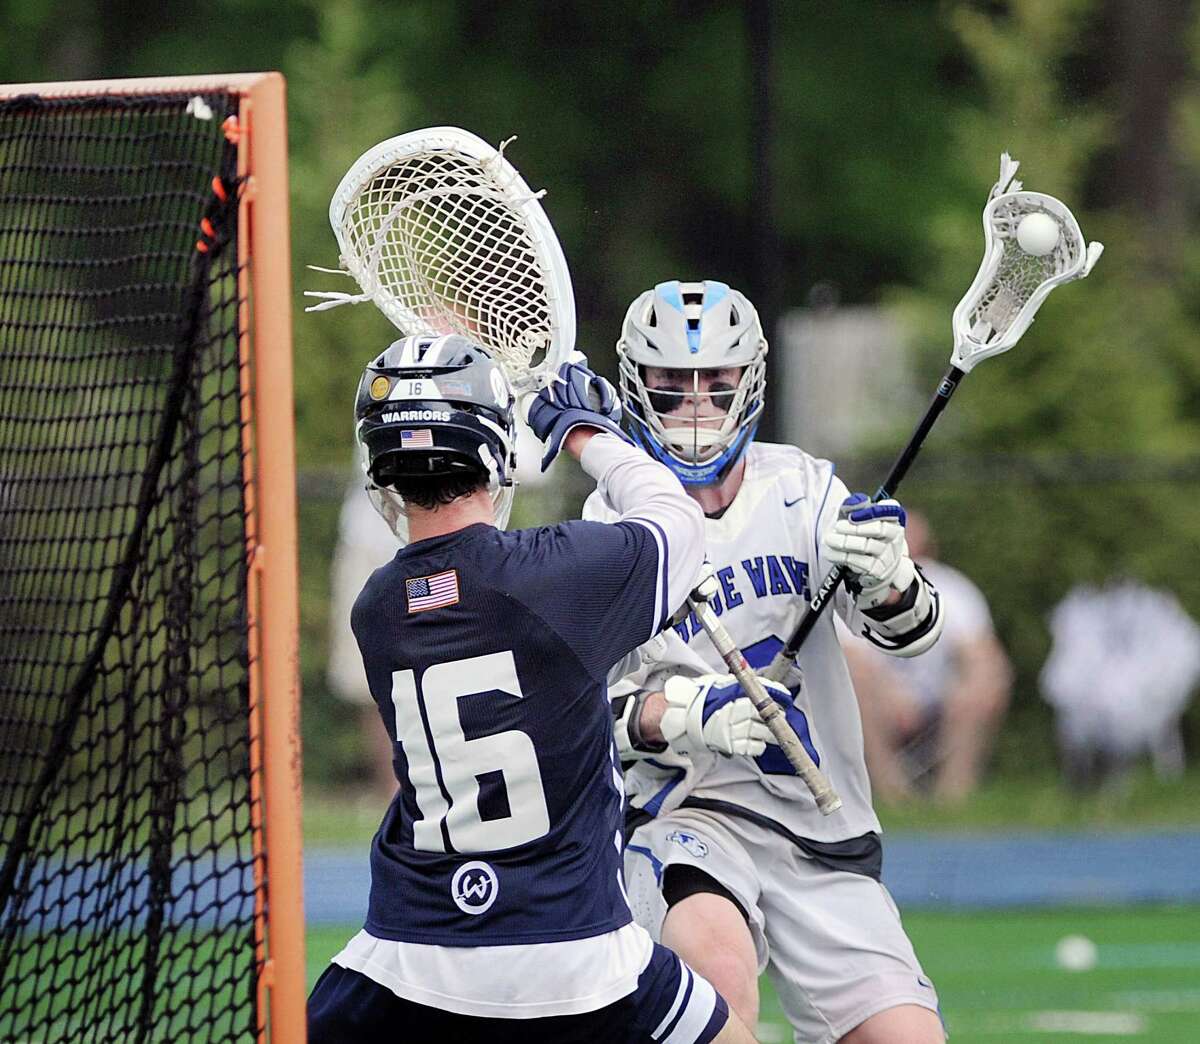 Hudson Pokorny of Darien, right, prepares to shoot as Wilton goalie Andrew Calabrese (#16) defends on a shot that he stopped during the class L boys high school lacrosse quarterfinal match between Dairen High School and Wilton High School at Darien, Conn., Saturday, June 2, 2018. Darien won the match 11-10 over Wilton to advance.